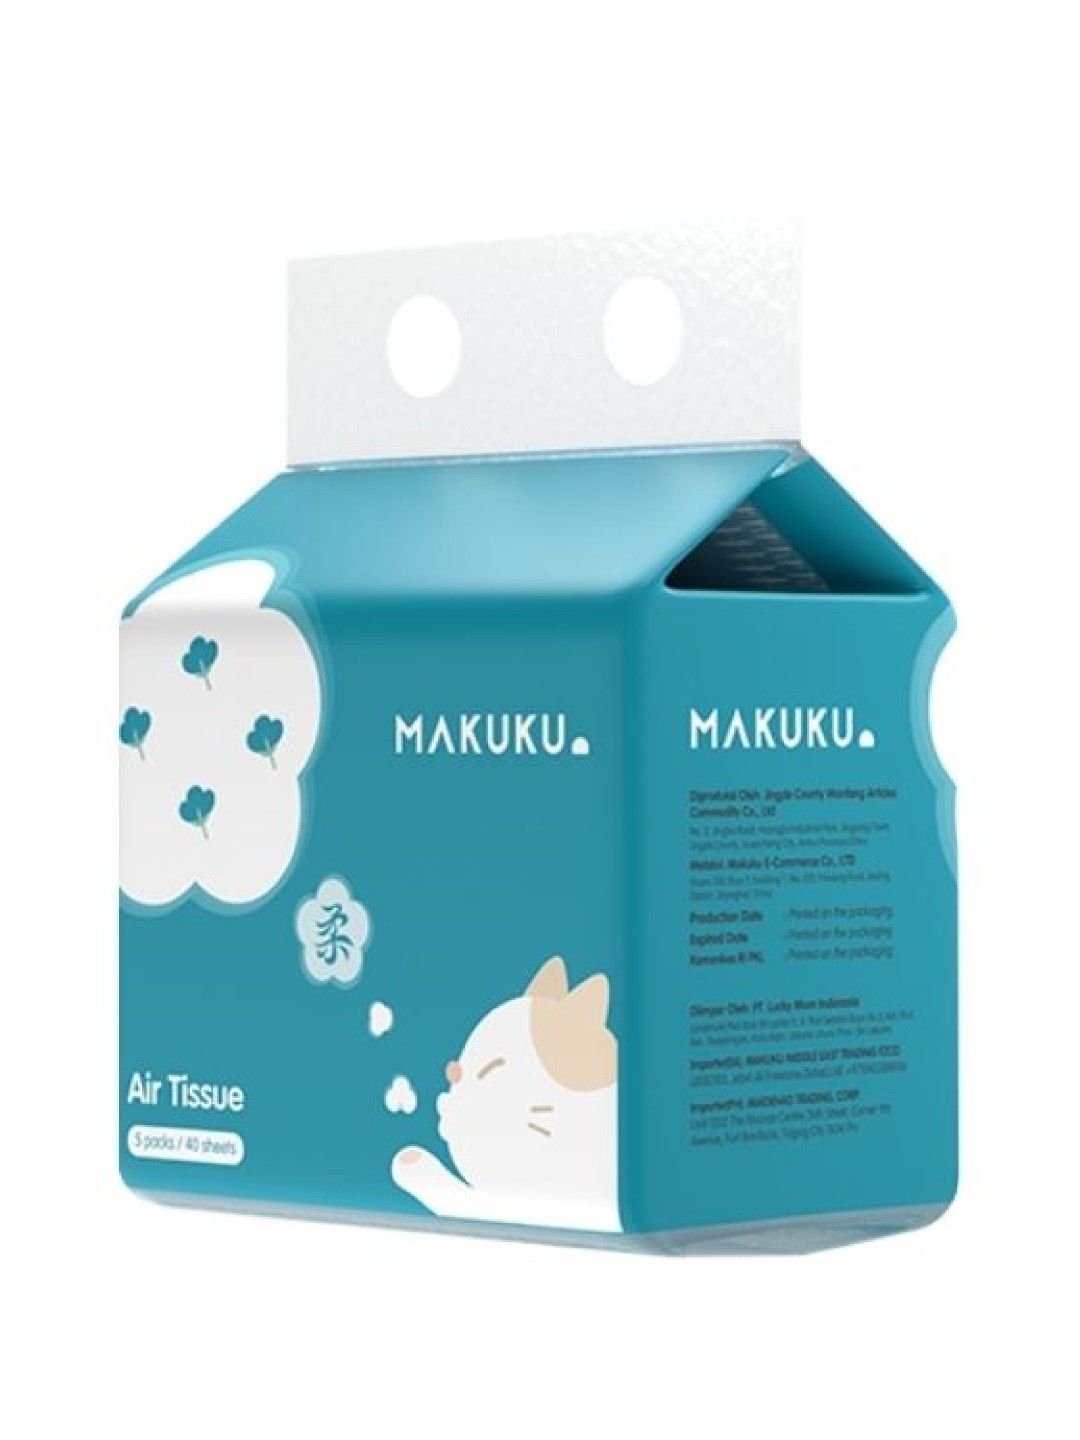 Makuku Cottony 3-layer Facial Tissues 5 in 1 Pack